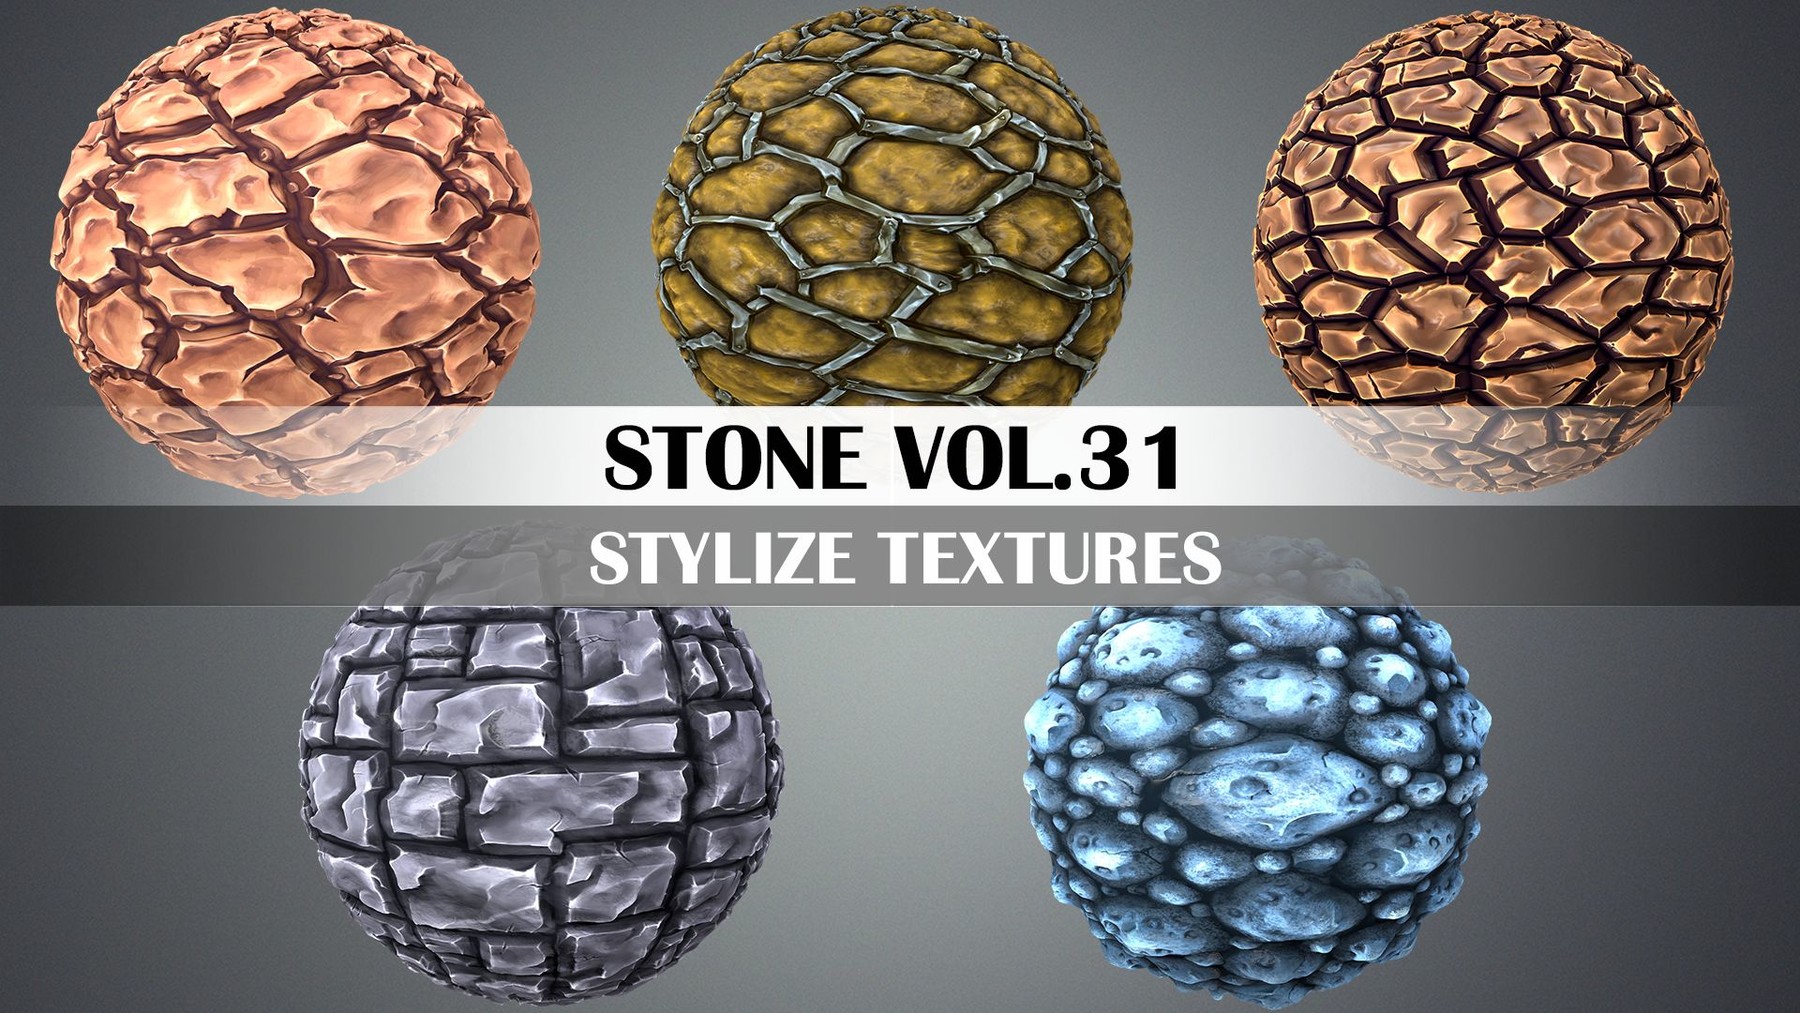 ArtStation - Stylized Texture Pack - VOL 4 | Game Assets